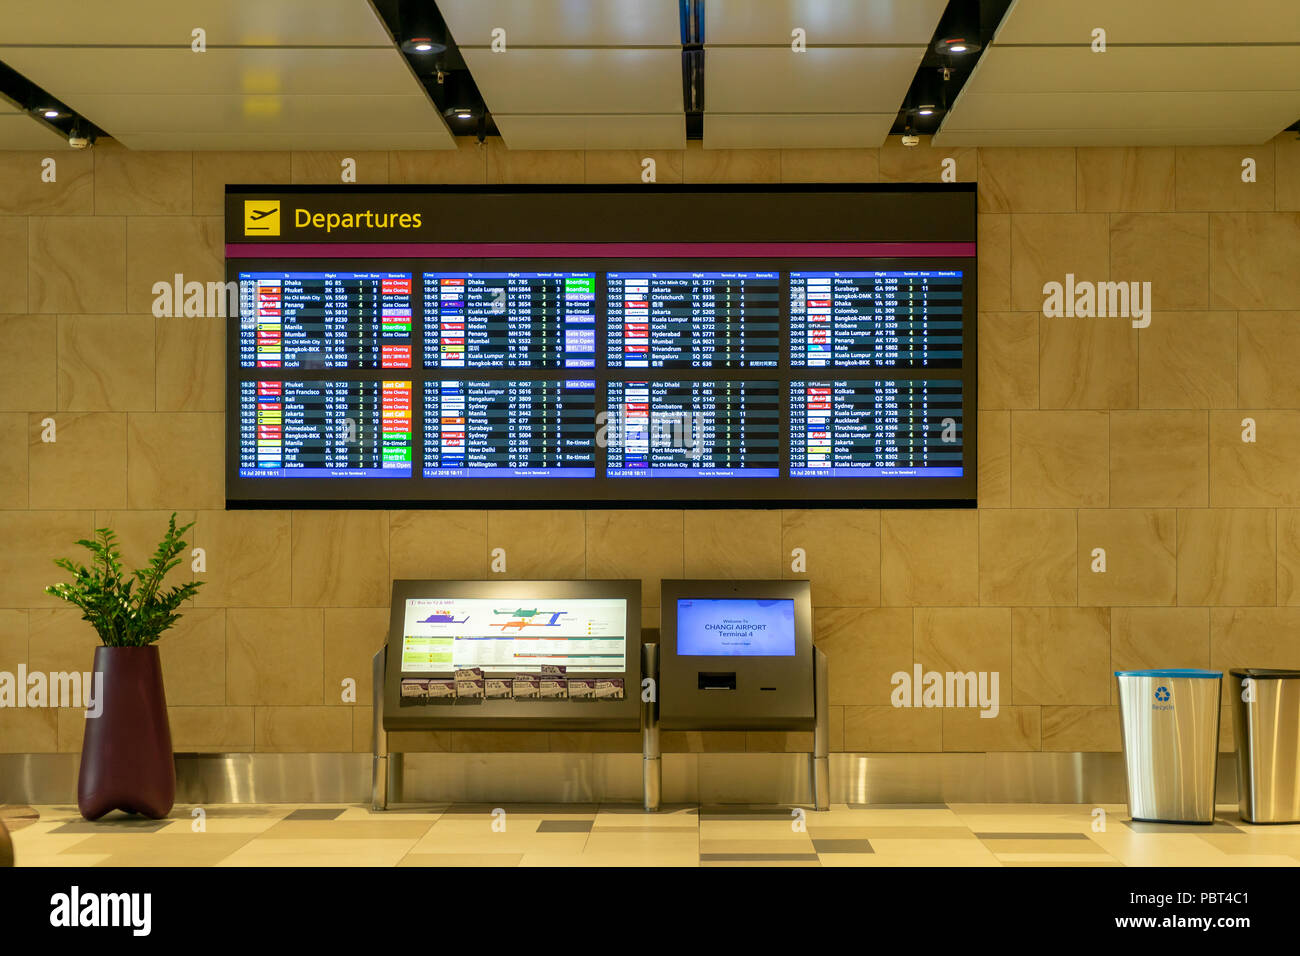 Singapore - July 14, 2018: Departure Board in Changi Airport. Departure Hall Singapore. It has 4 passenger terminals, and it is one of the largest tra Stock Photo